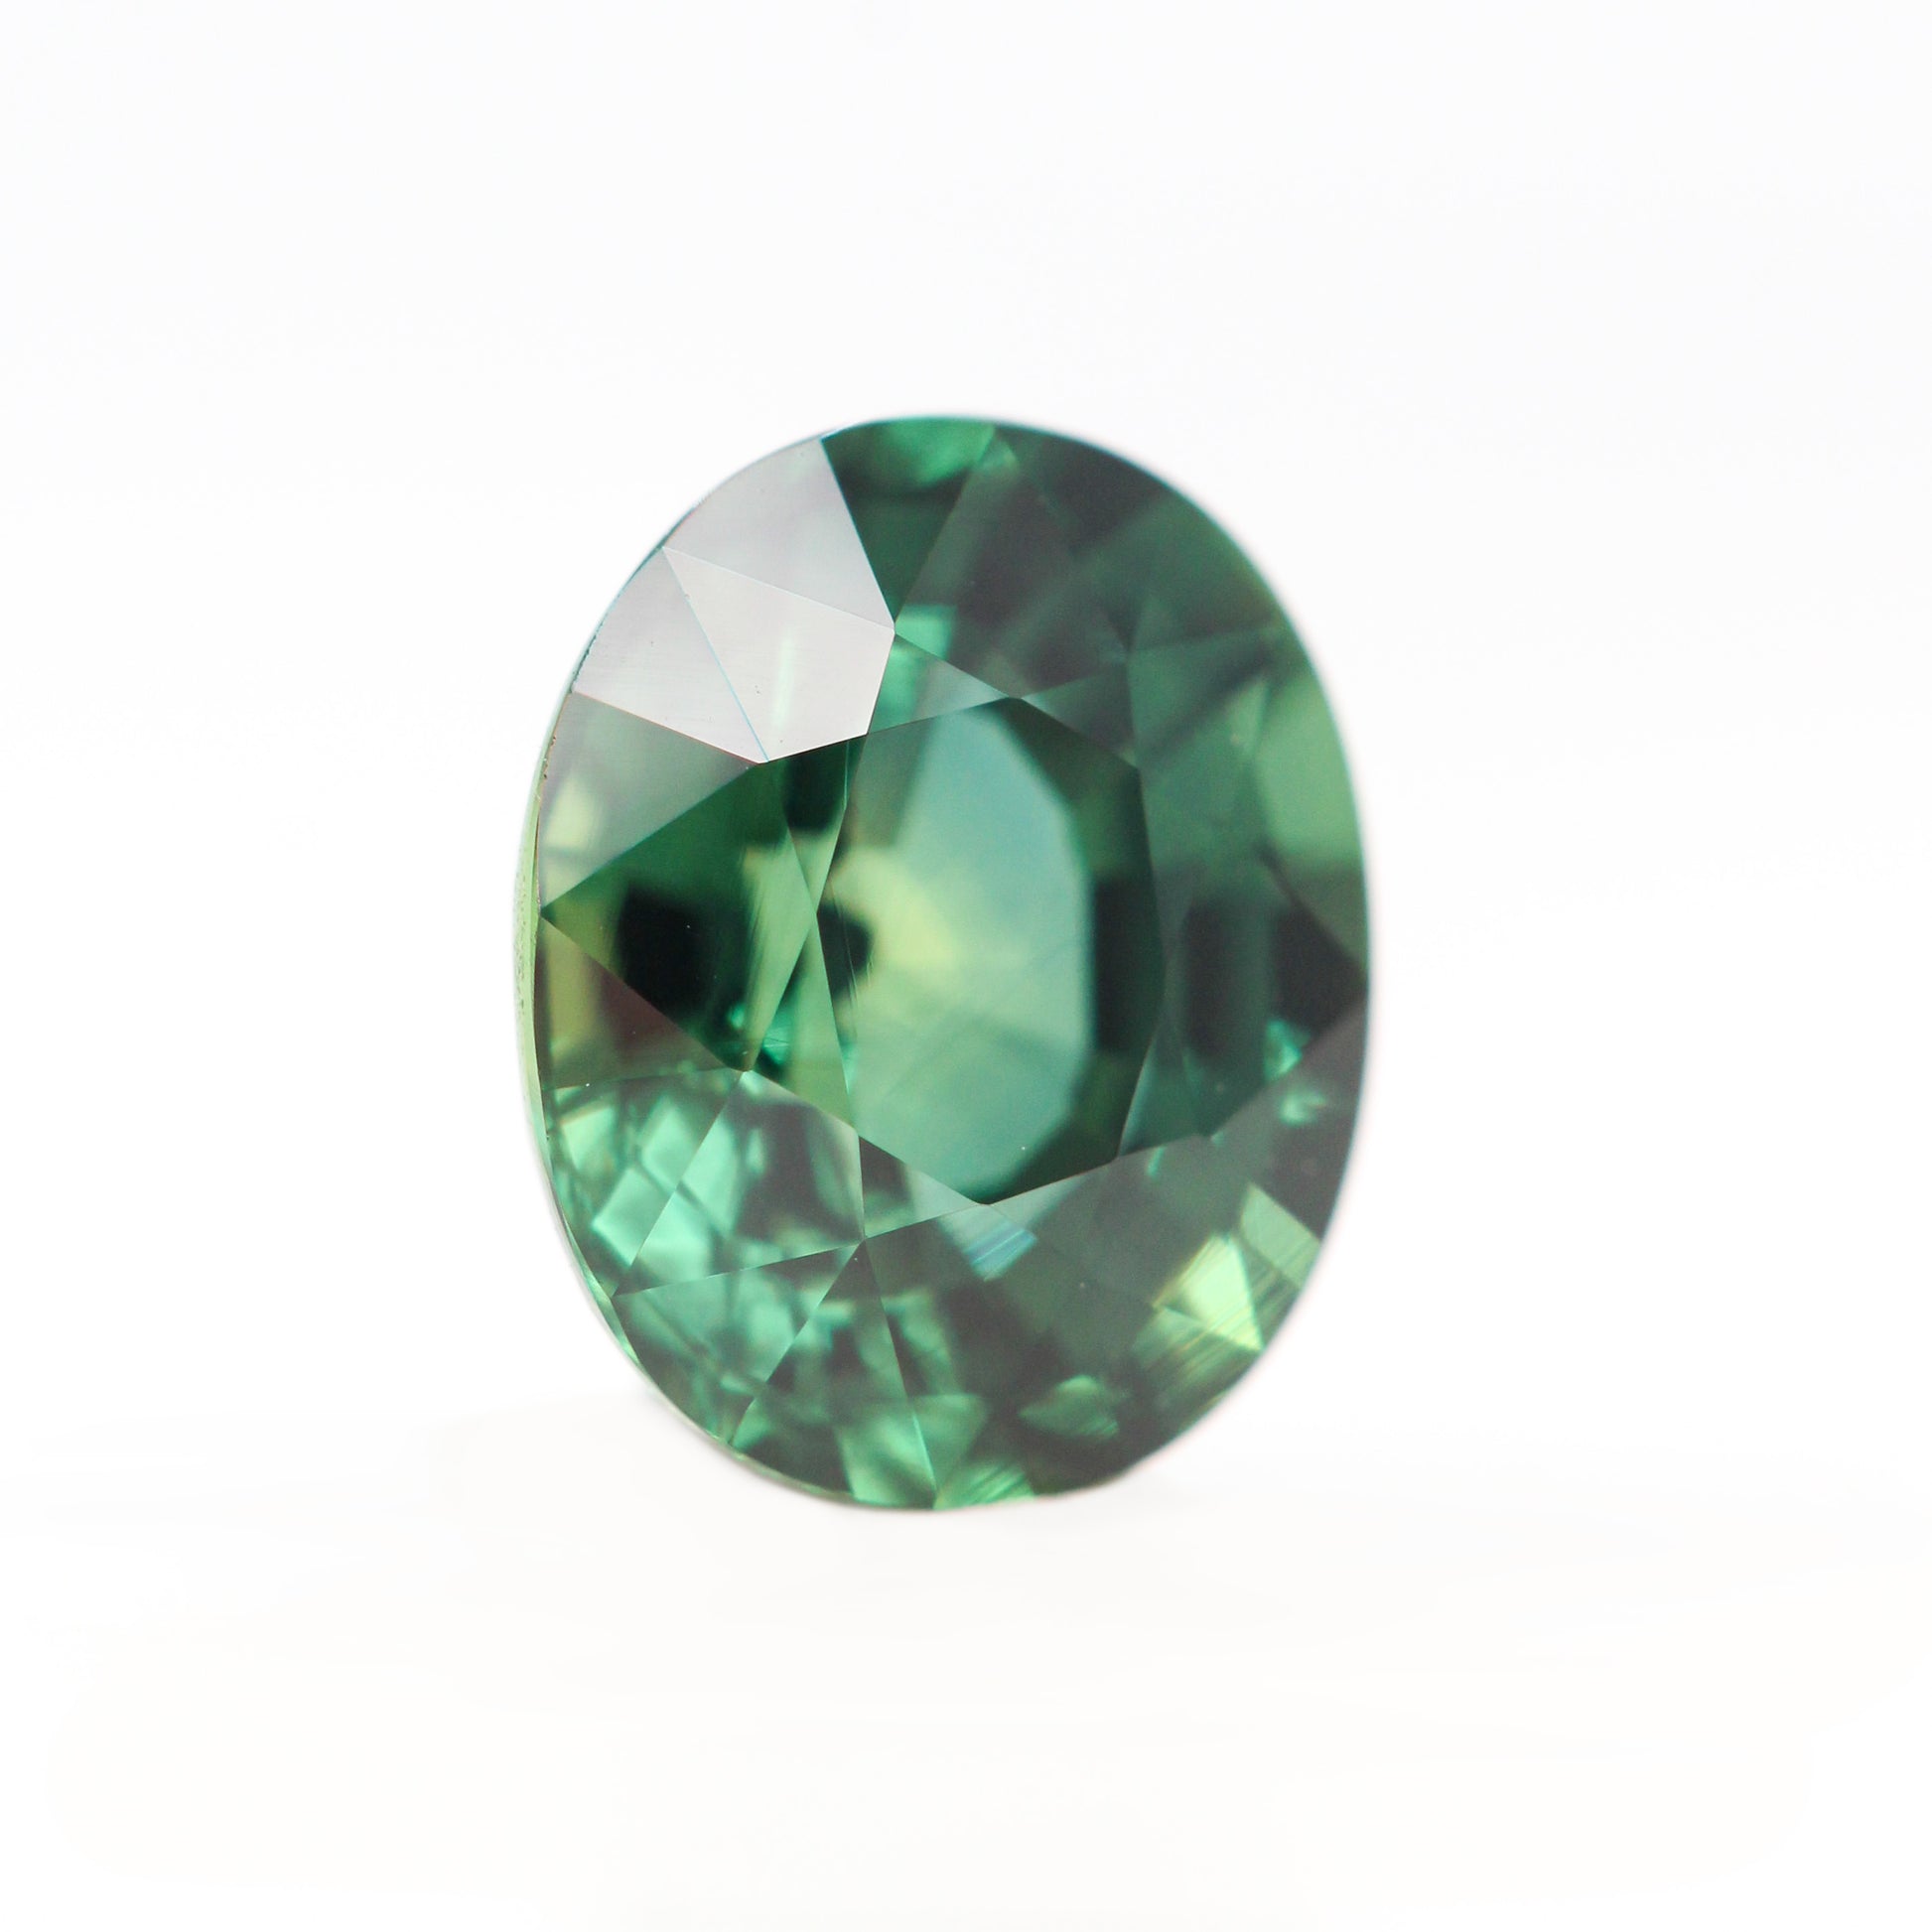 1.27 Carat Green Oval Madagascar Sapphire for Custom Work - Inventory Code GOS127 - Midwinter Co. Alternative Bridal Rings and Modern Fine Jewelry